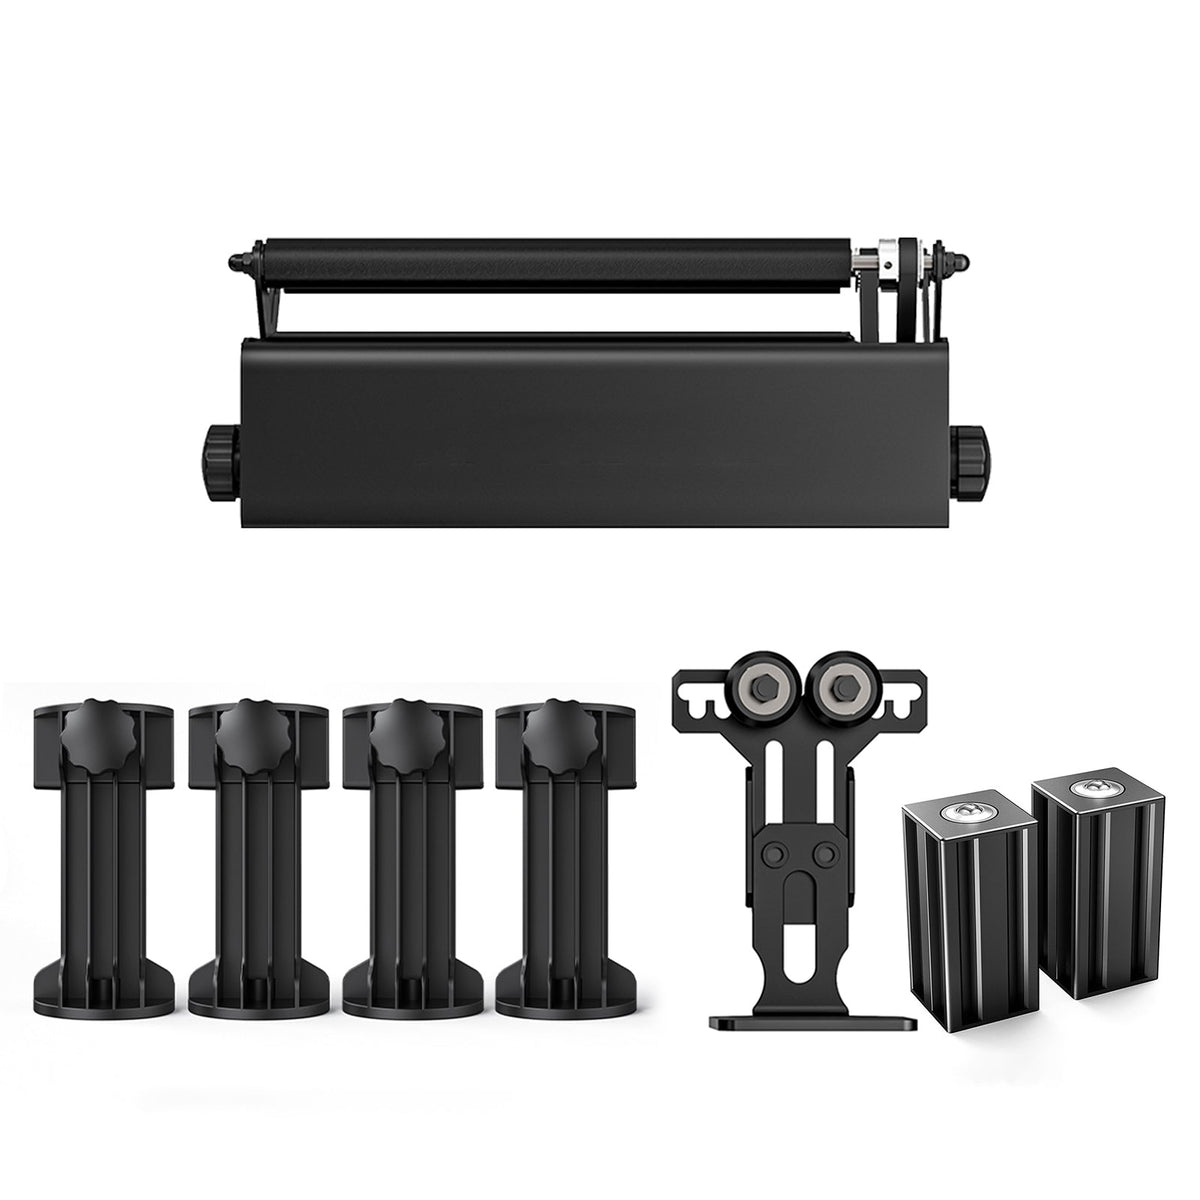 ATOMSTACK Maker S30 Pro Y-axis Extension Kit 400x850mm